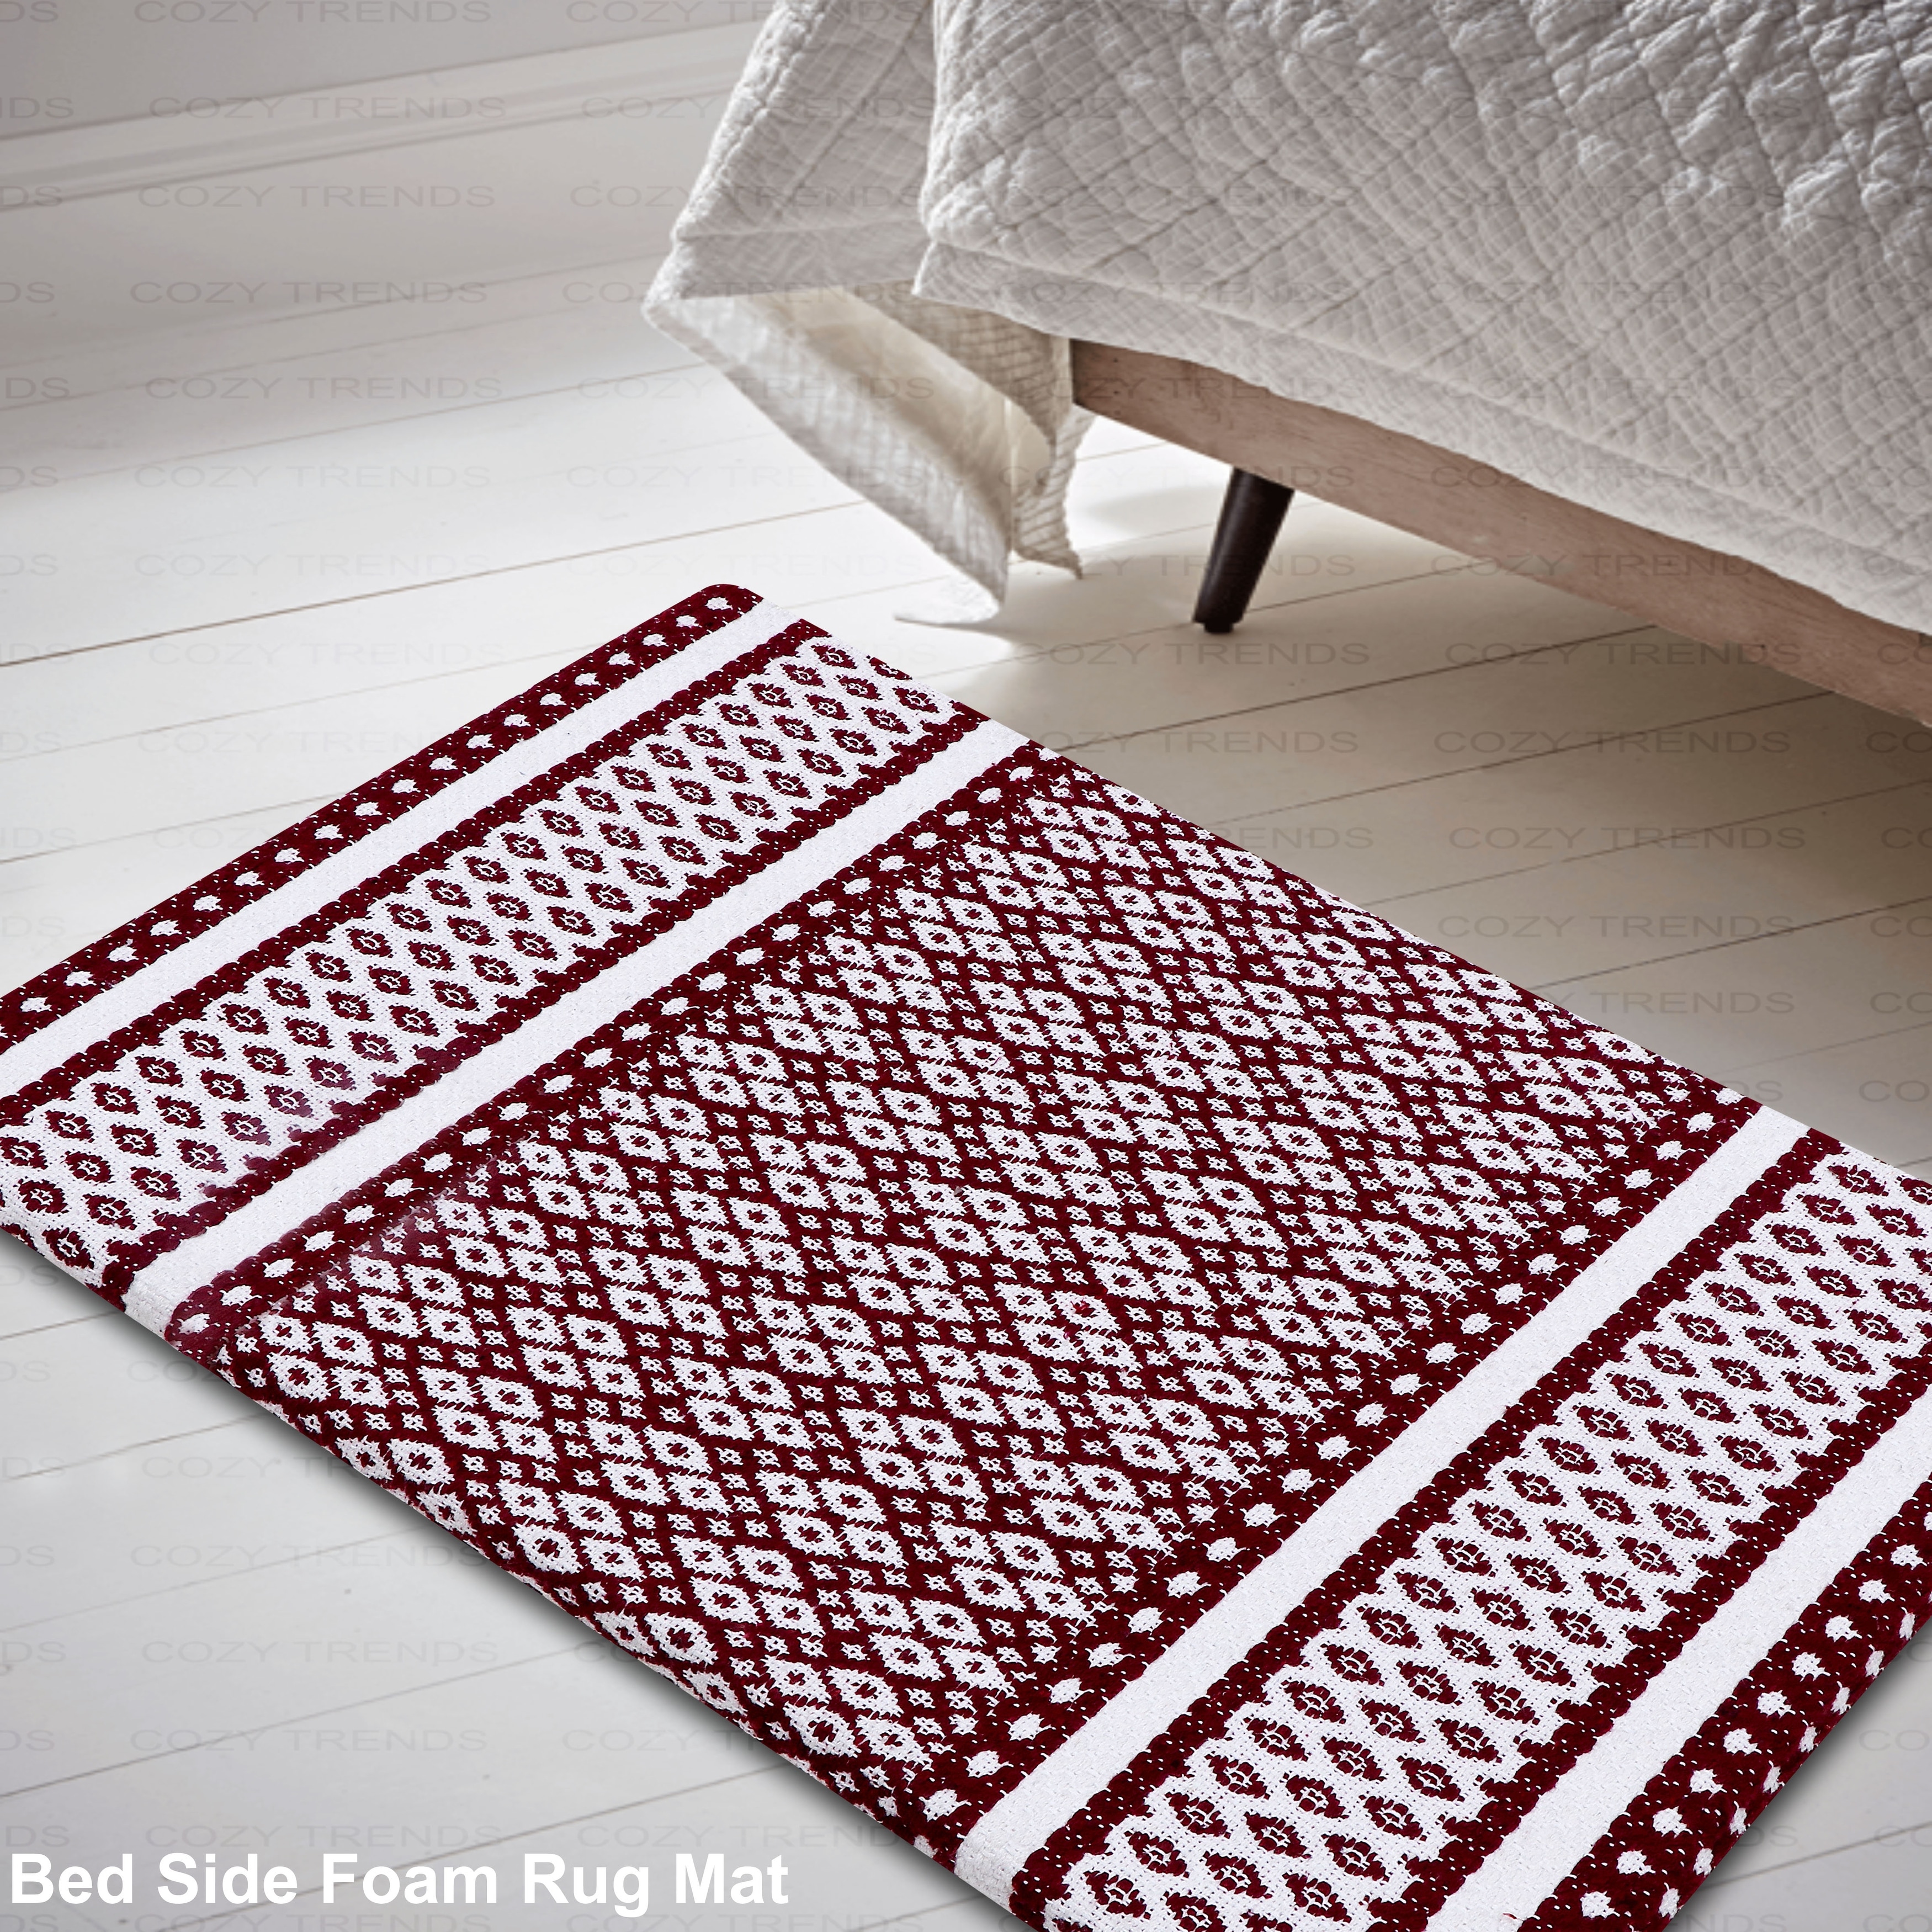 https://ak1.ostkcdn.com/images/products/is/images/direct/78ef58f57d24534e62545e68d701c96f55aa9687/Cotton-Kitchen-Mat-Cushioned-Anti-Fatigue-Rug%2C-Non-Slip-Mats-Comfort-Foam-Rug-for-Kitchen%2C-Office%2C-Sink%2C-Laundry---18%27%27x30%27%27.jpg